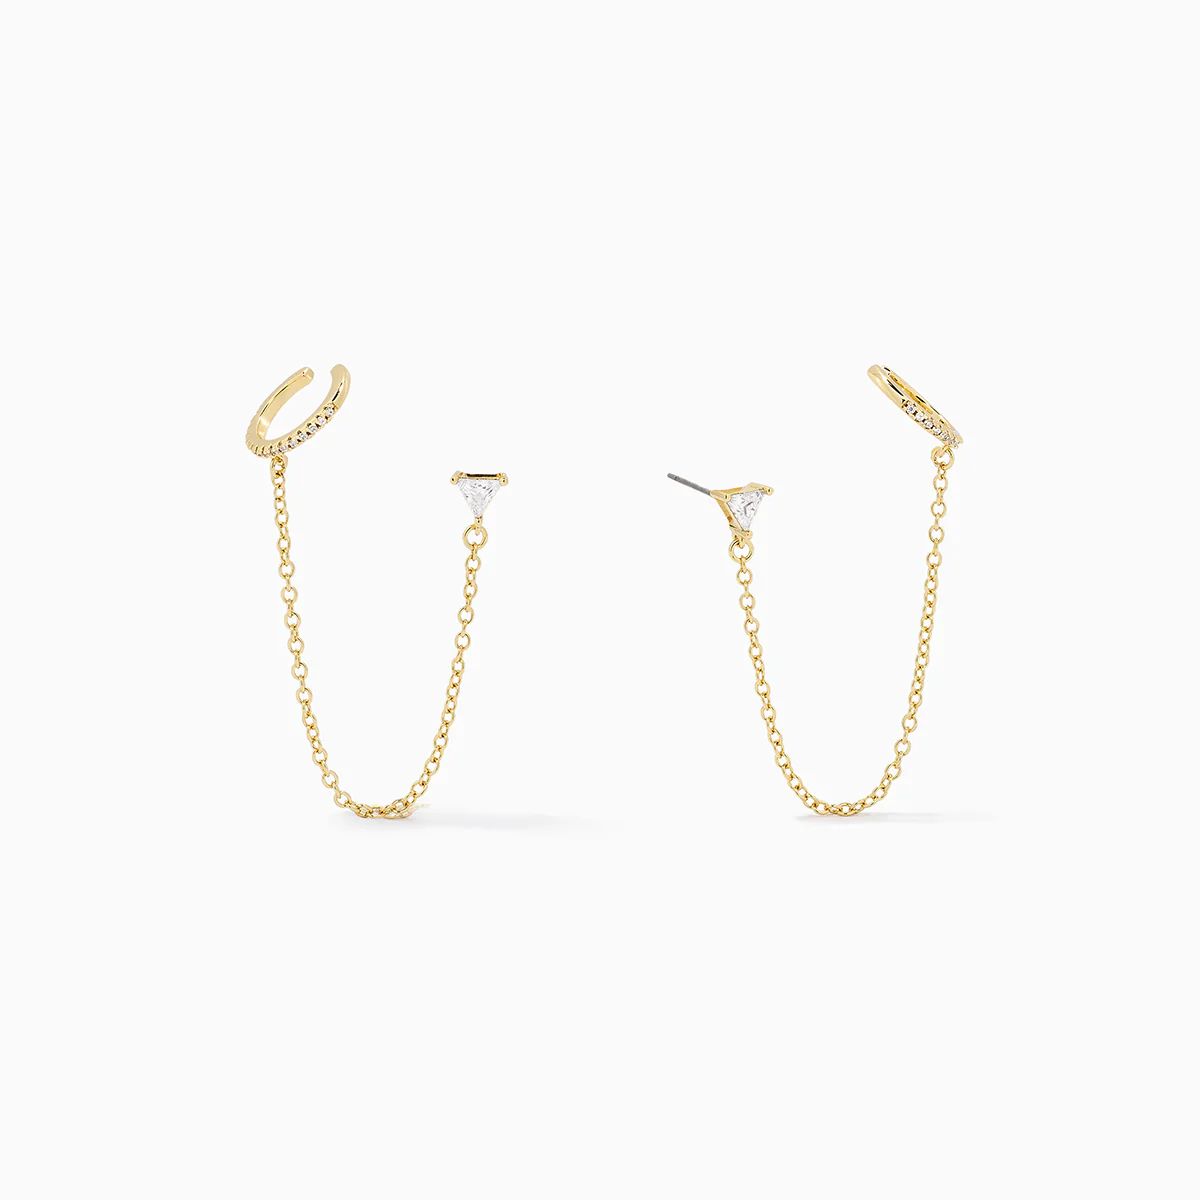 Chain and Cuff Ear Climber | Uncommon James